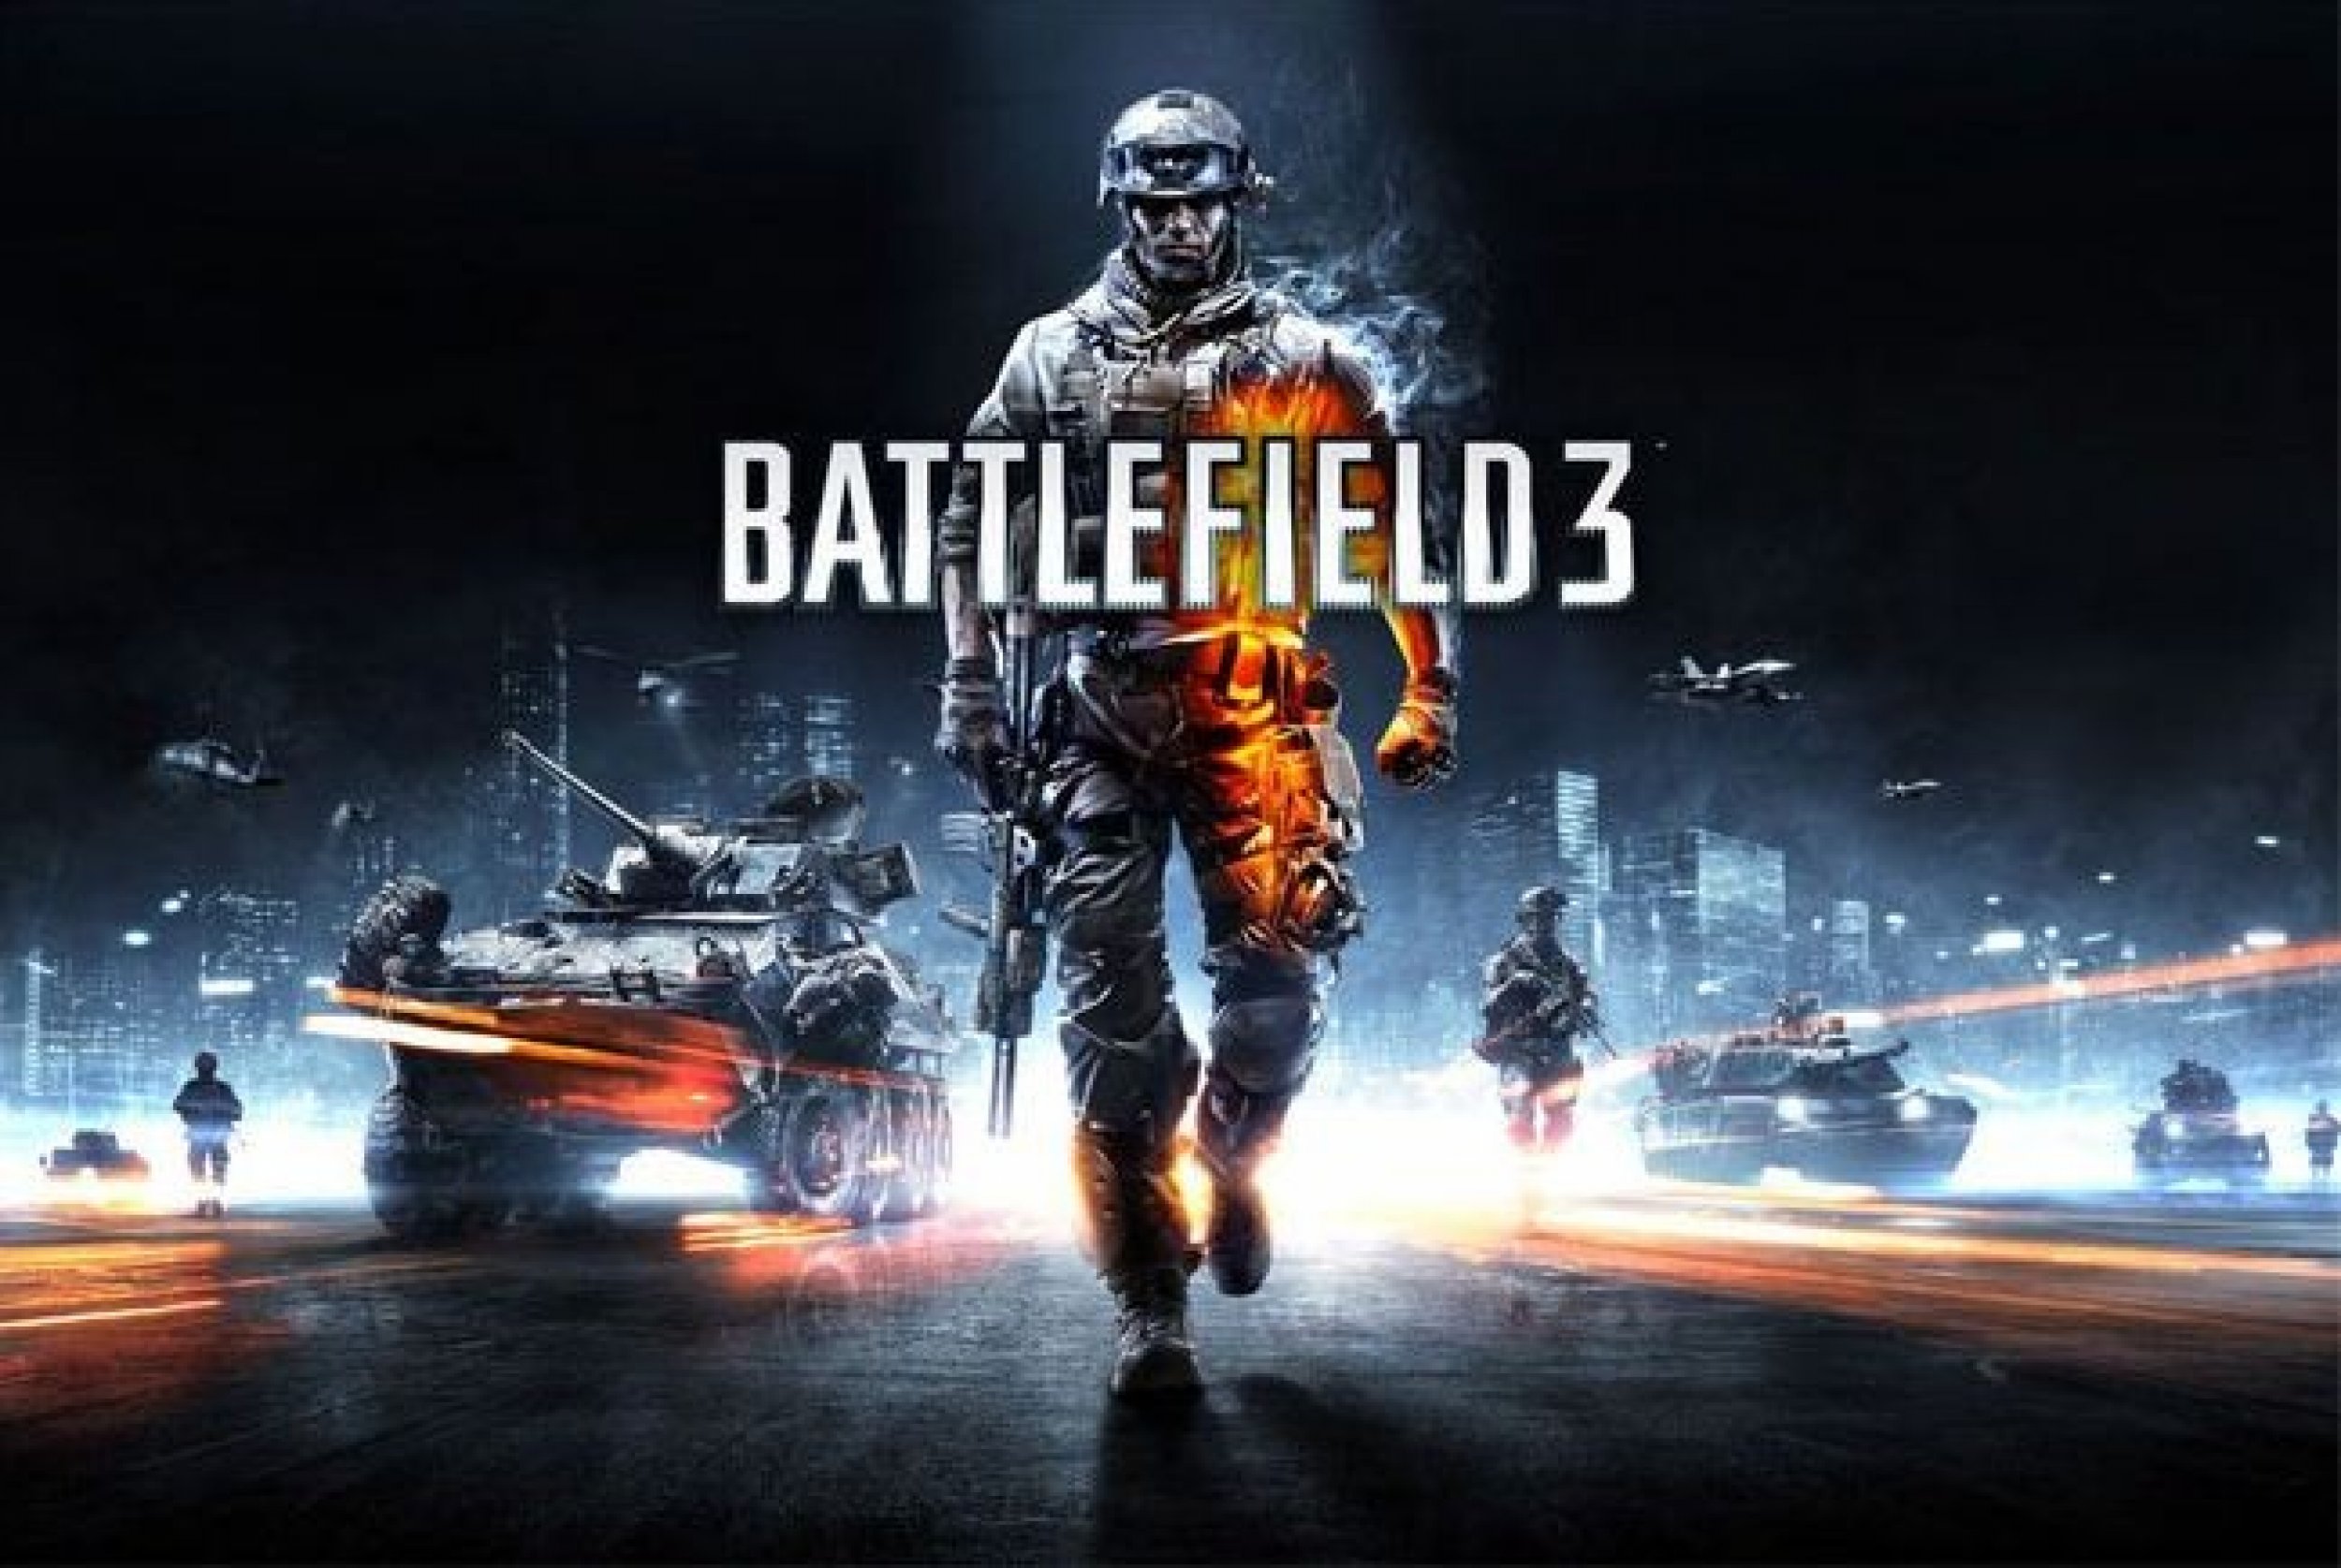 Battle Field 3 Patch PC Updates Released Tomorrow, No Word on Xbox 360 Release Date